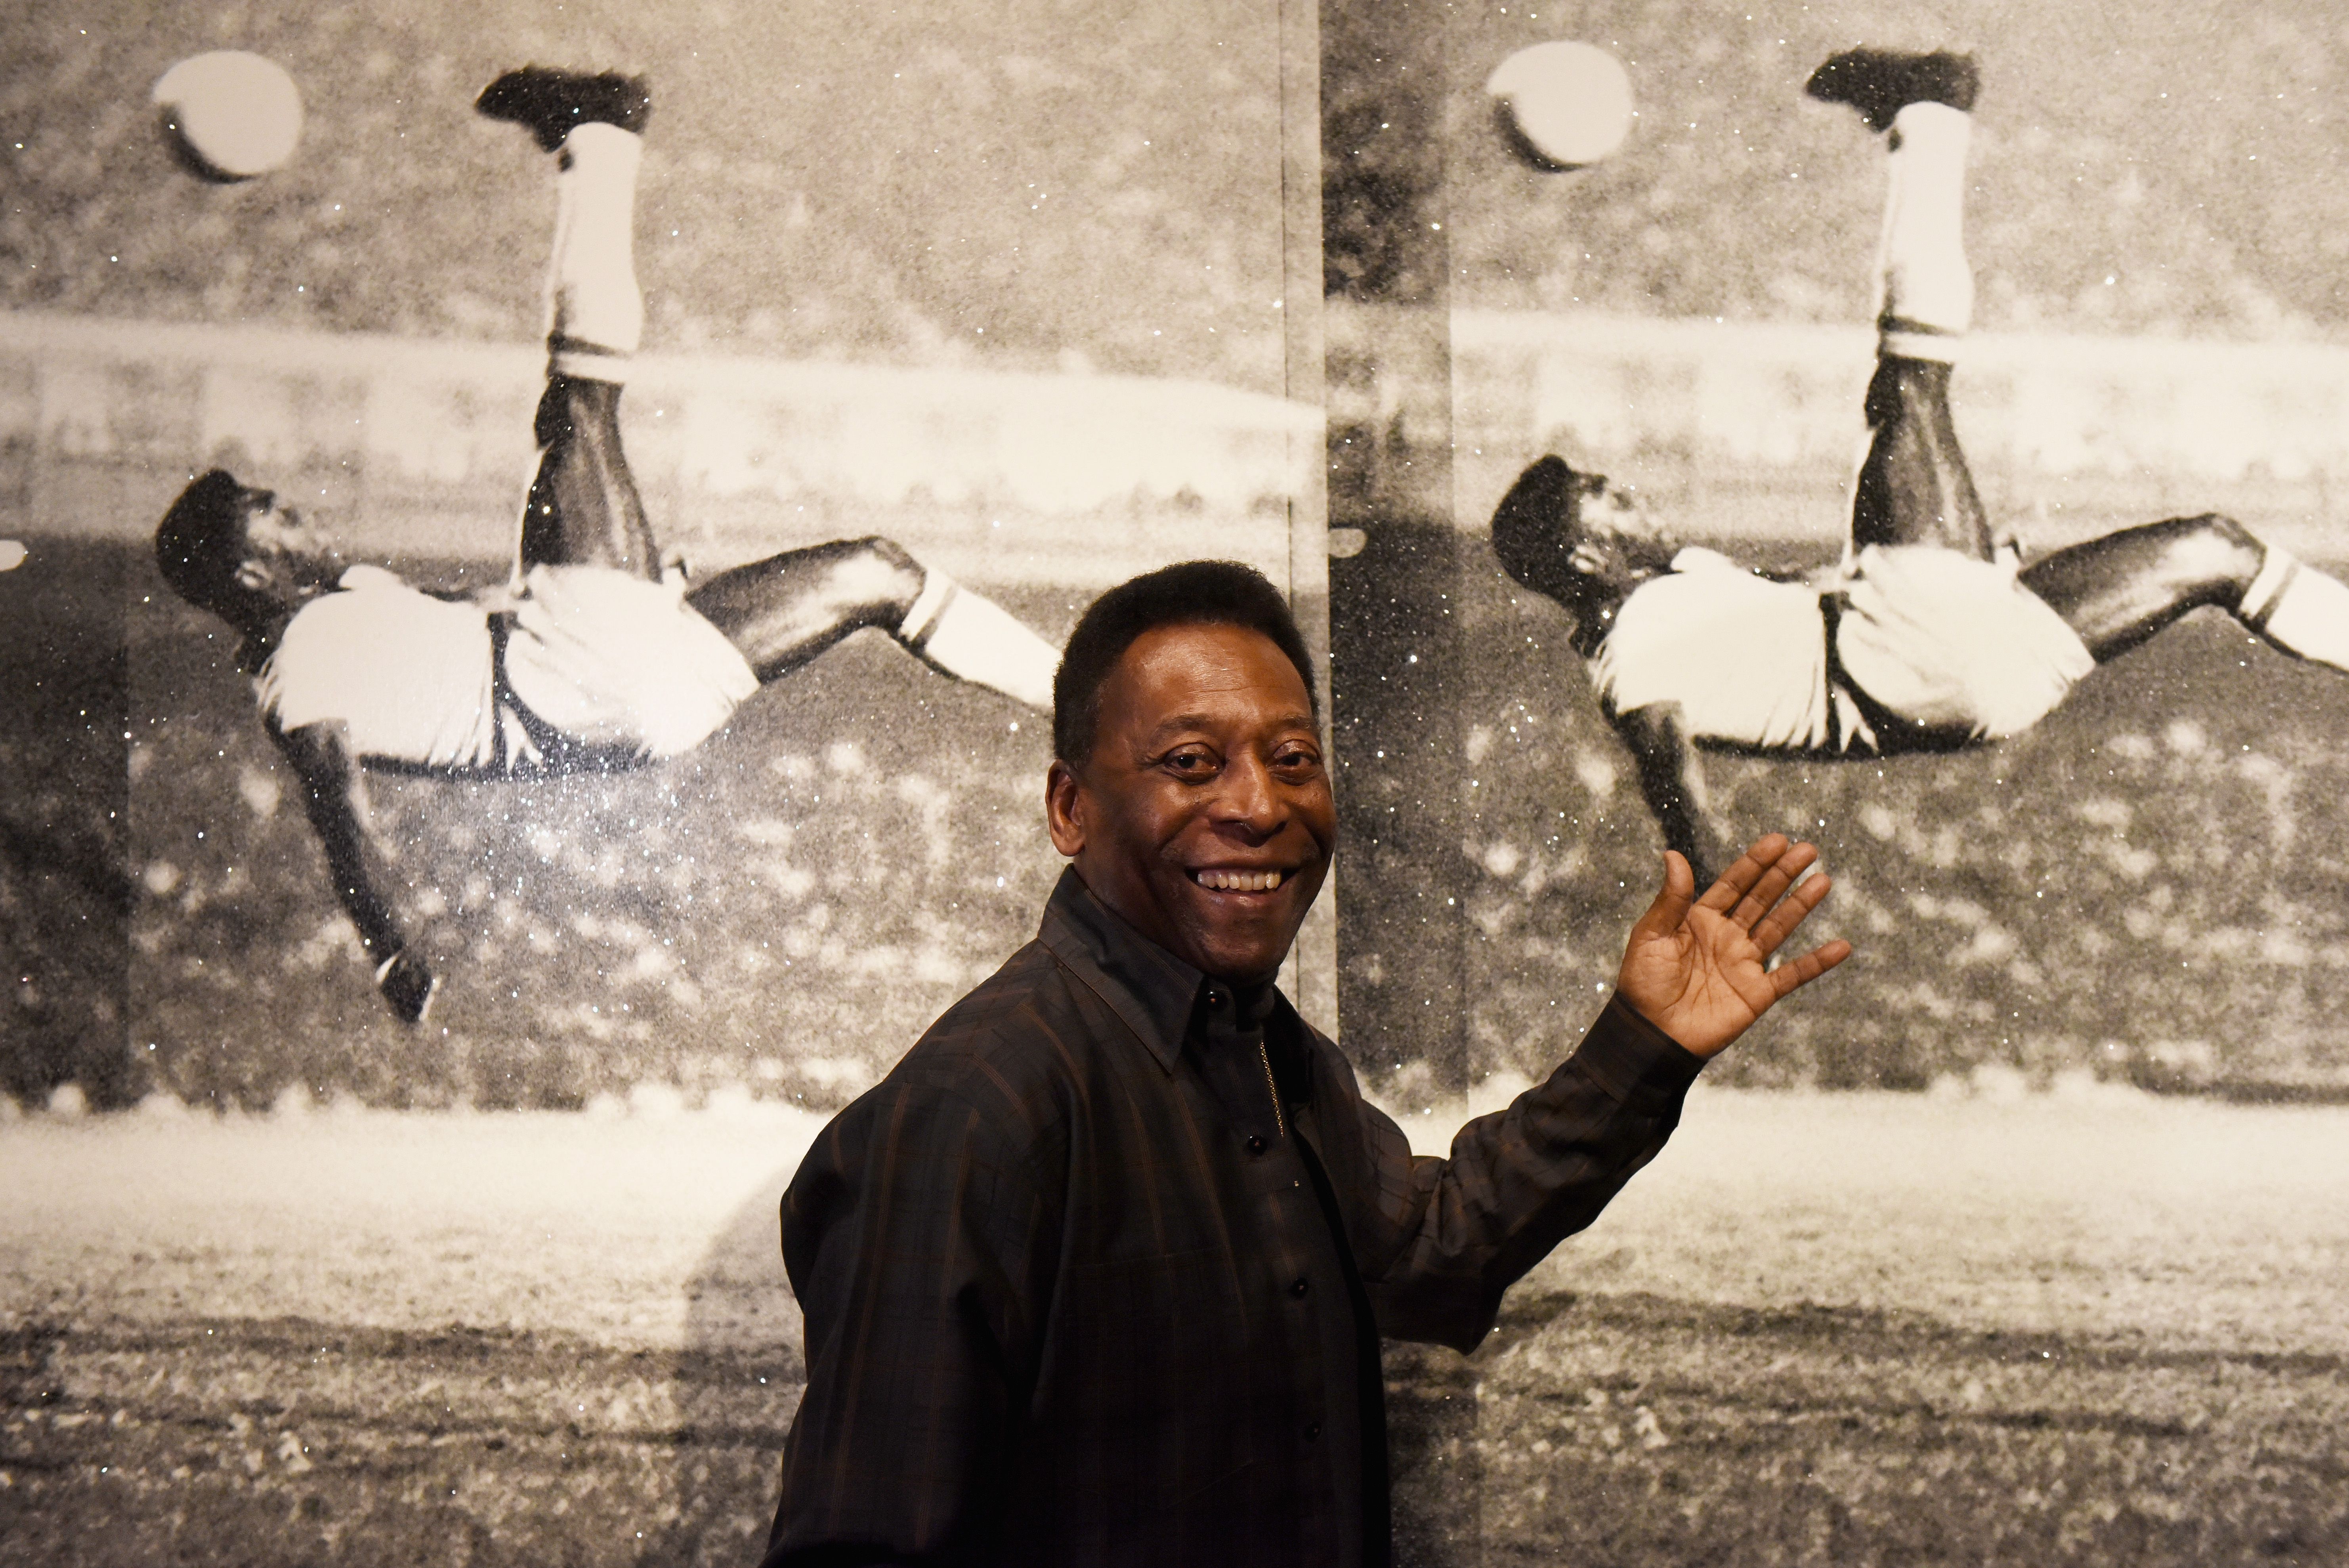 Pele smiles at an appearance